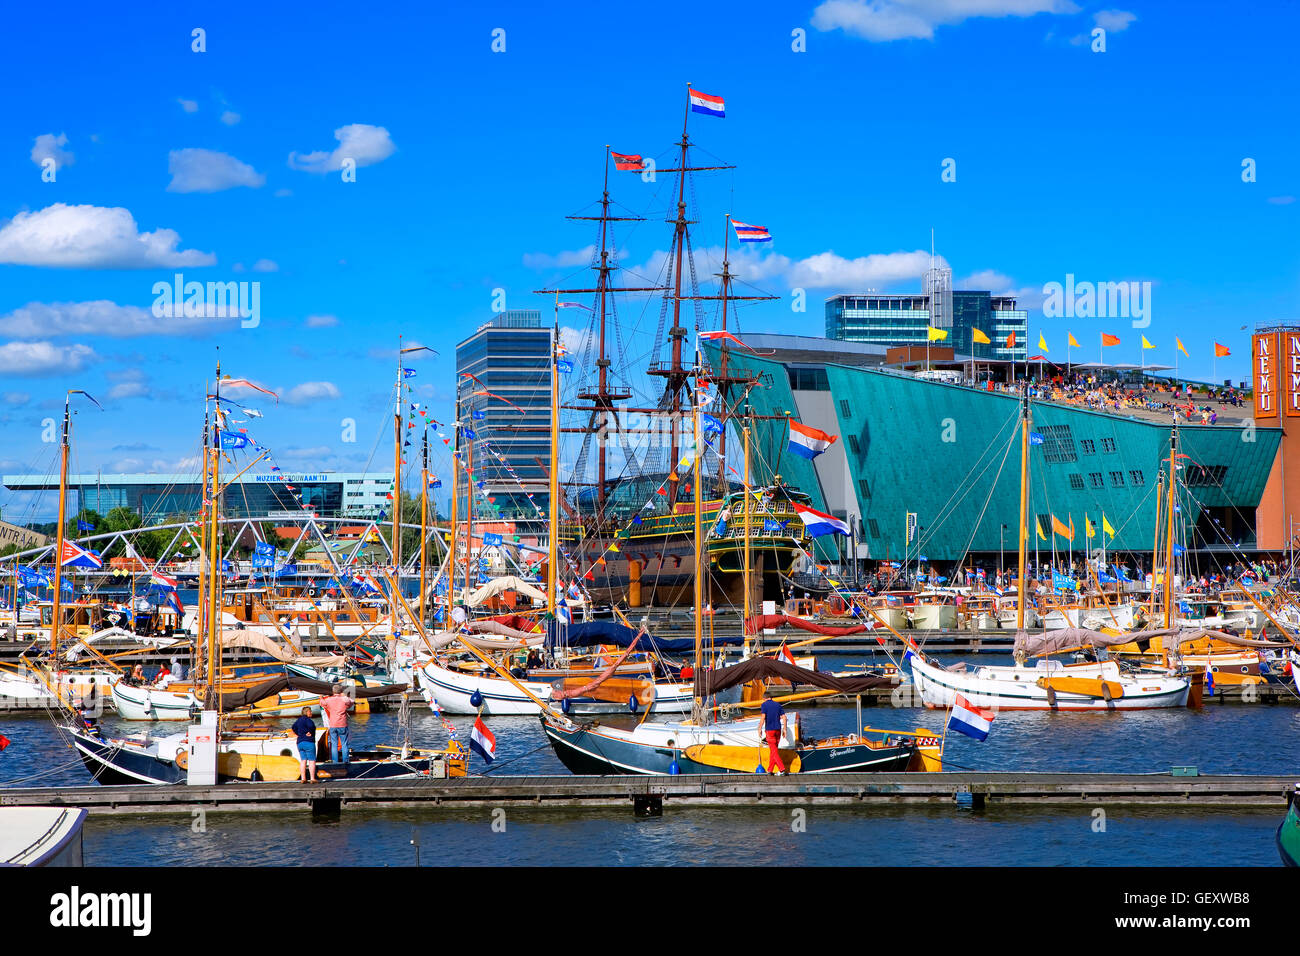 NEMO museum  and harbour in Amsterdam Stock Photo